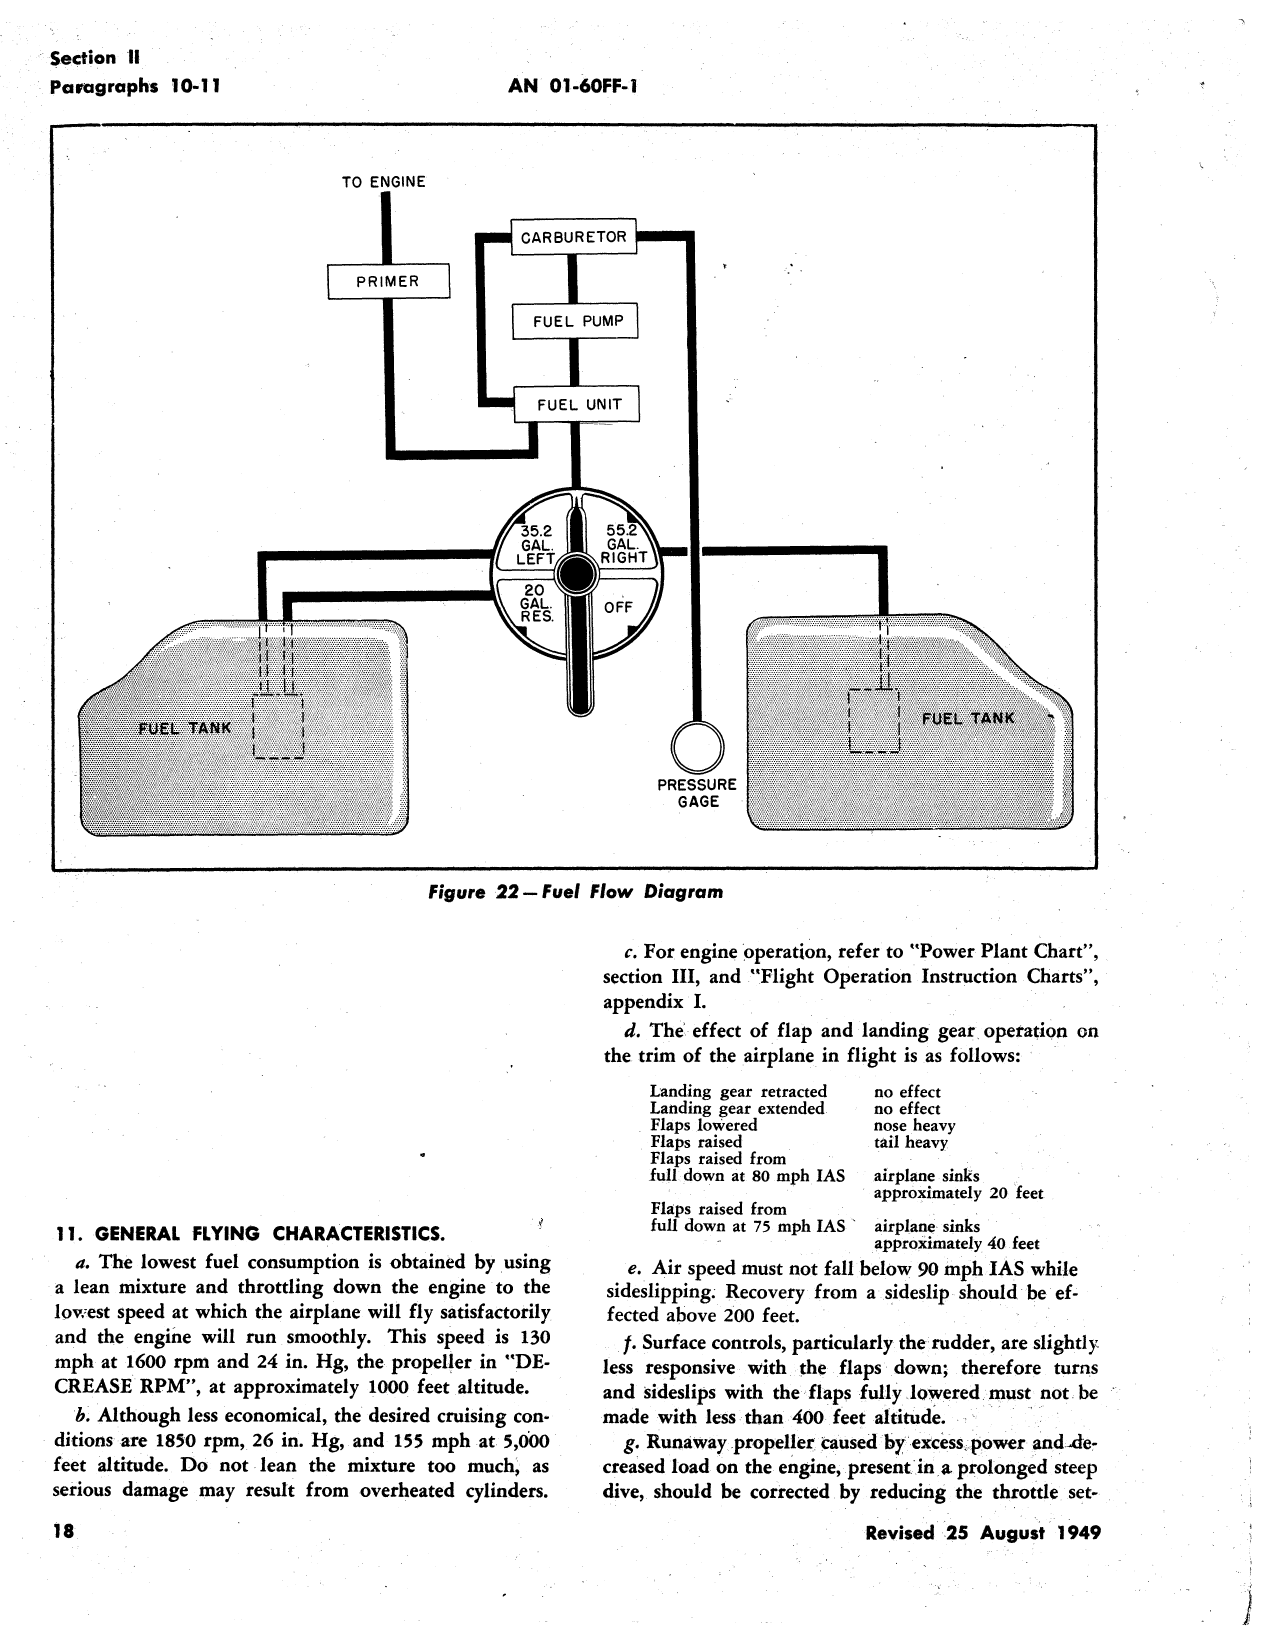 Sample page 25 from AirCorps Library document: Flight Operating Instructions - T-6